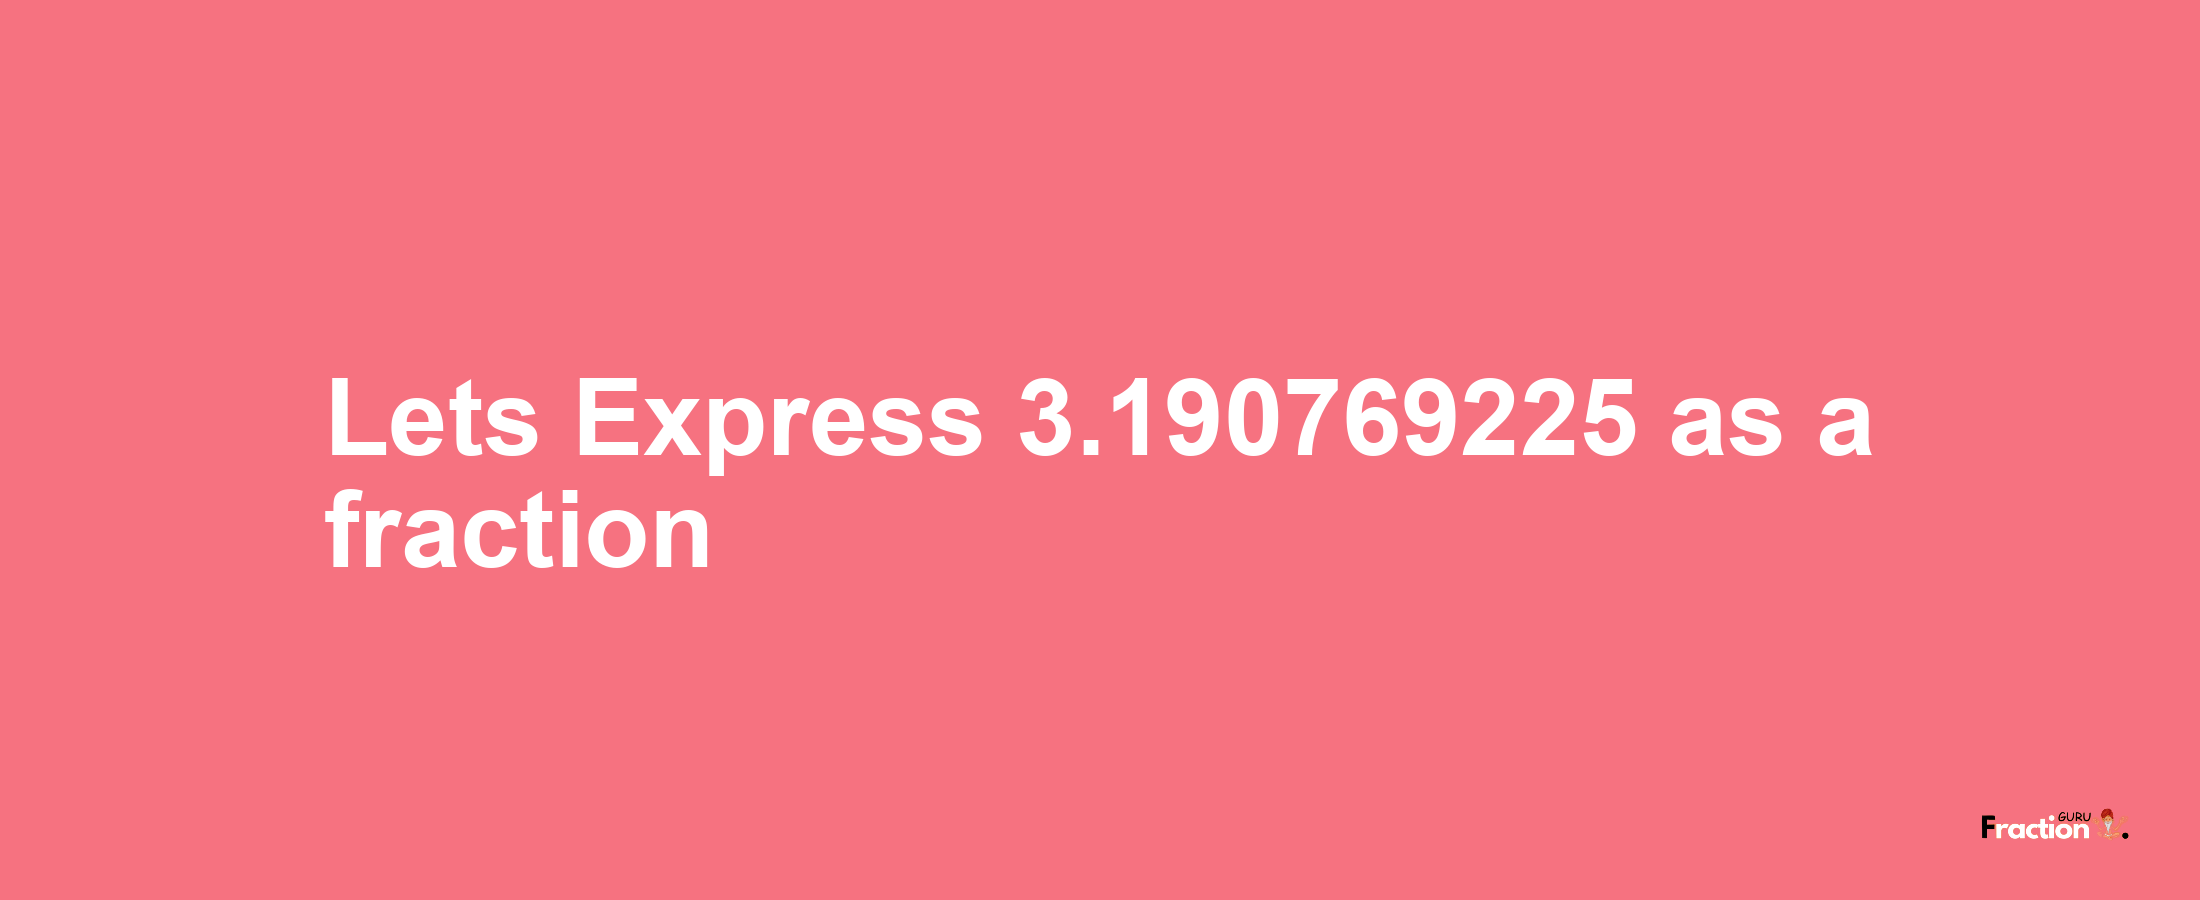 Lets Express 3.190769225 as afraction